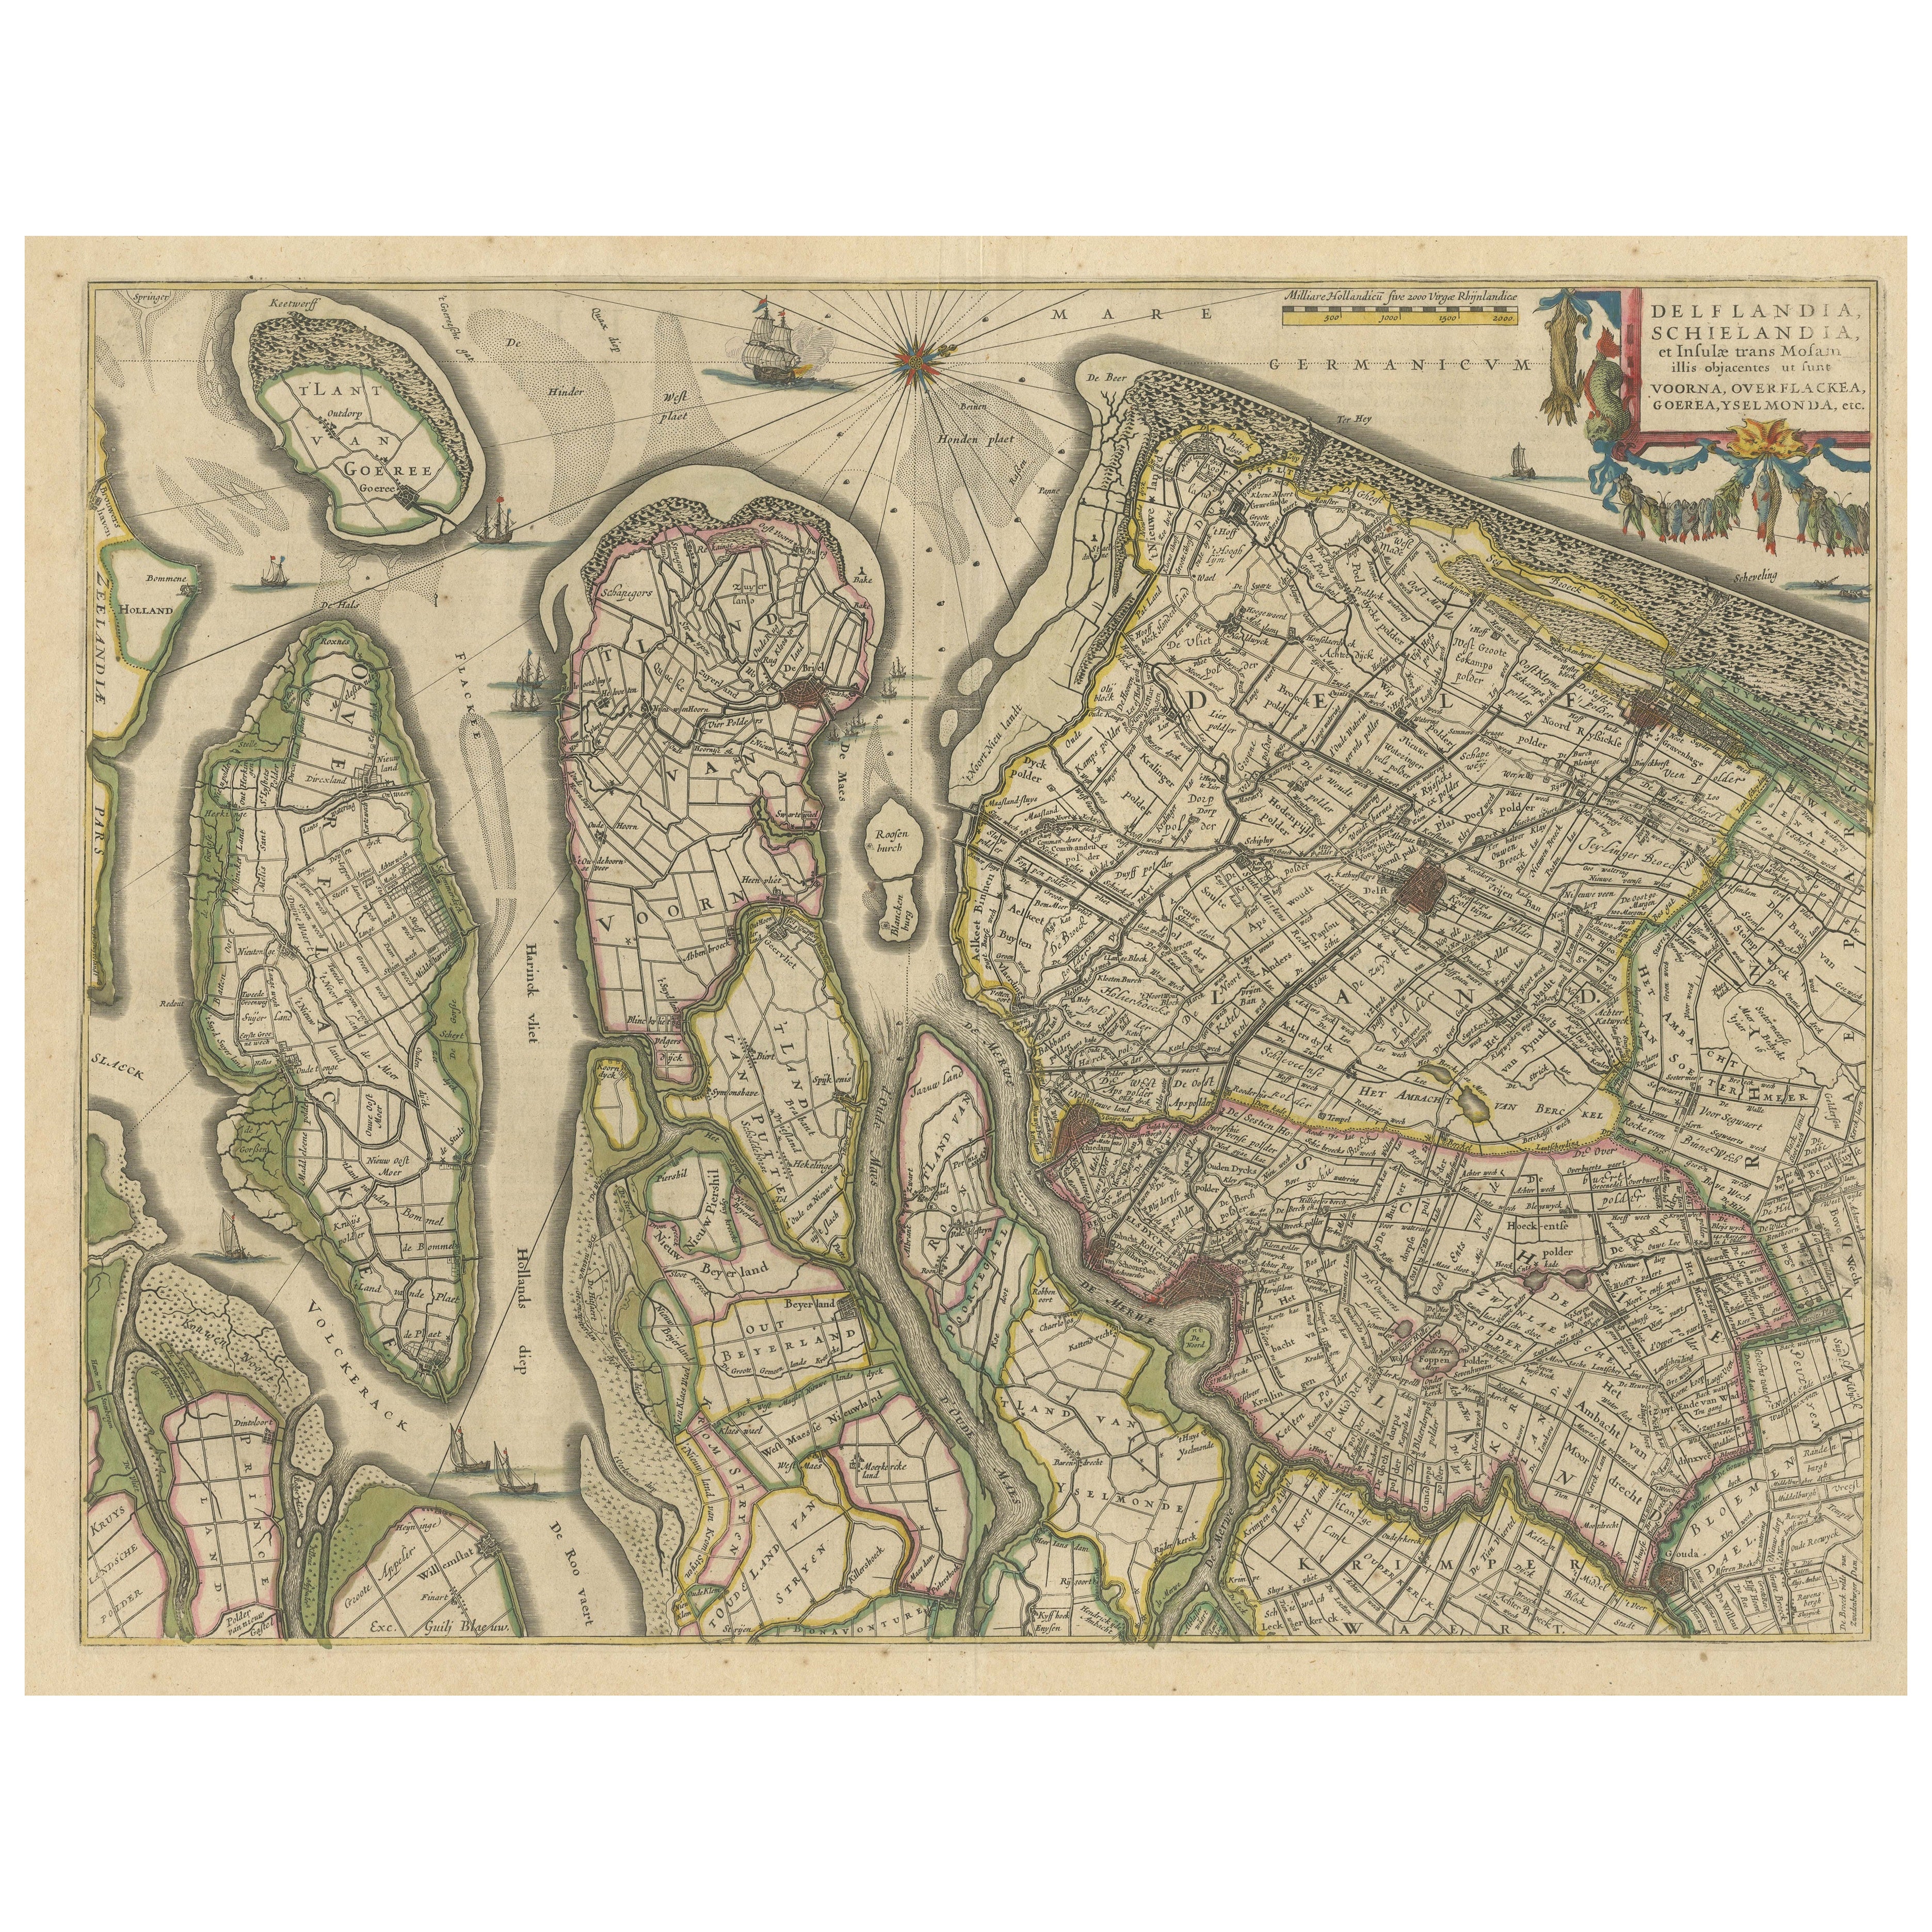 Antique Map of Delfland, Schieland and Islands of Zuid-Holland, the Netherlands For Sale